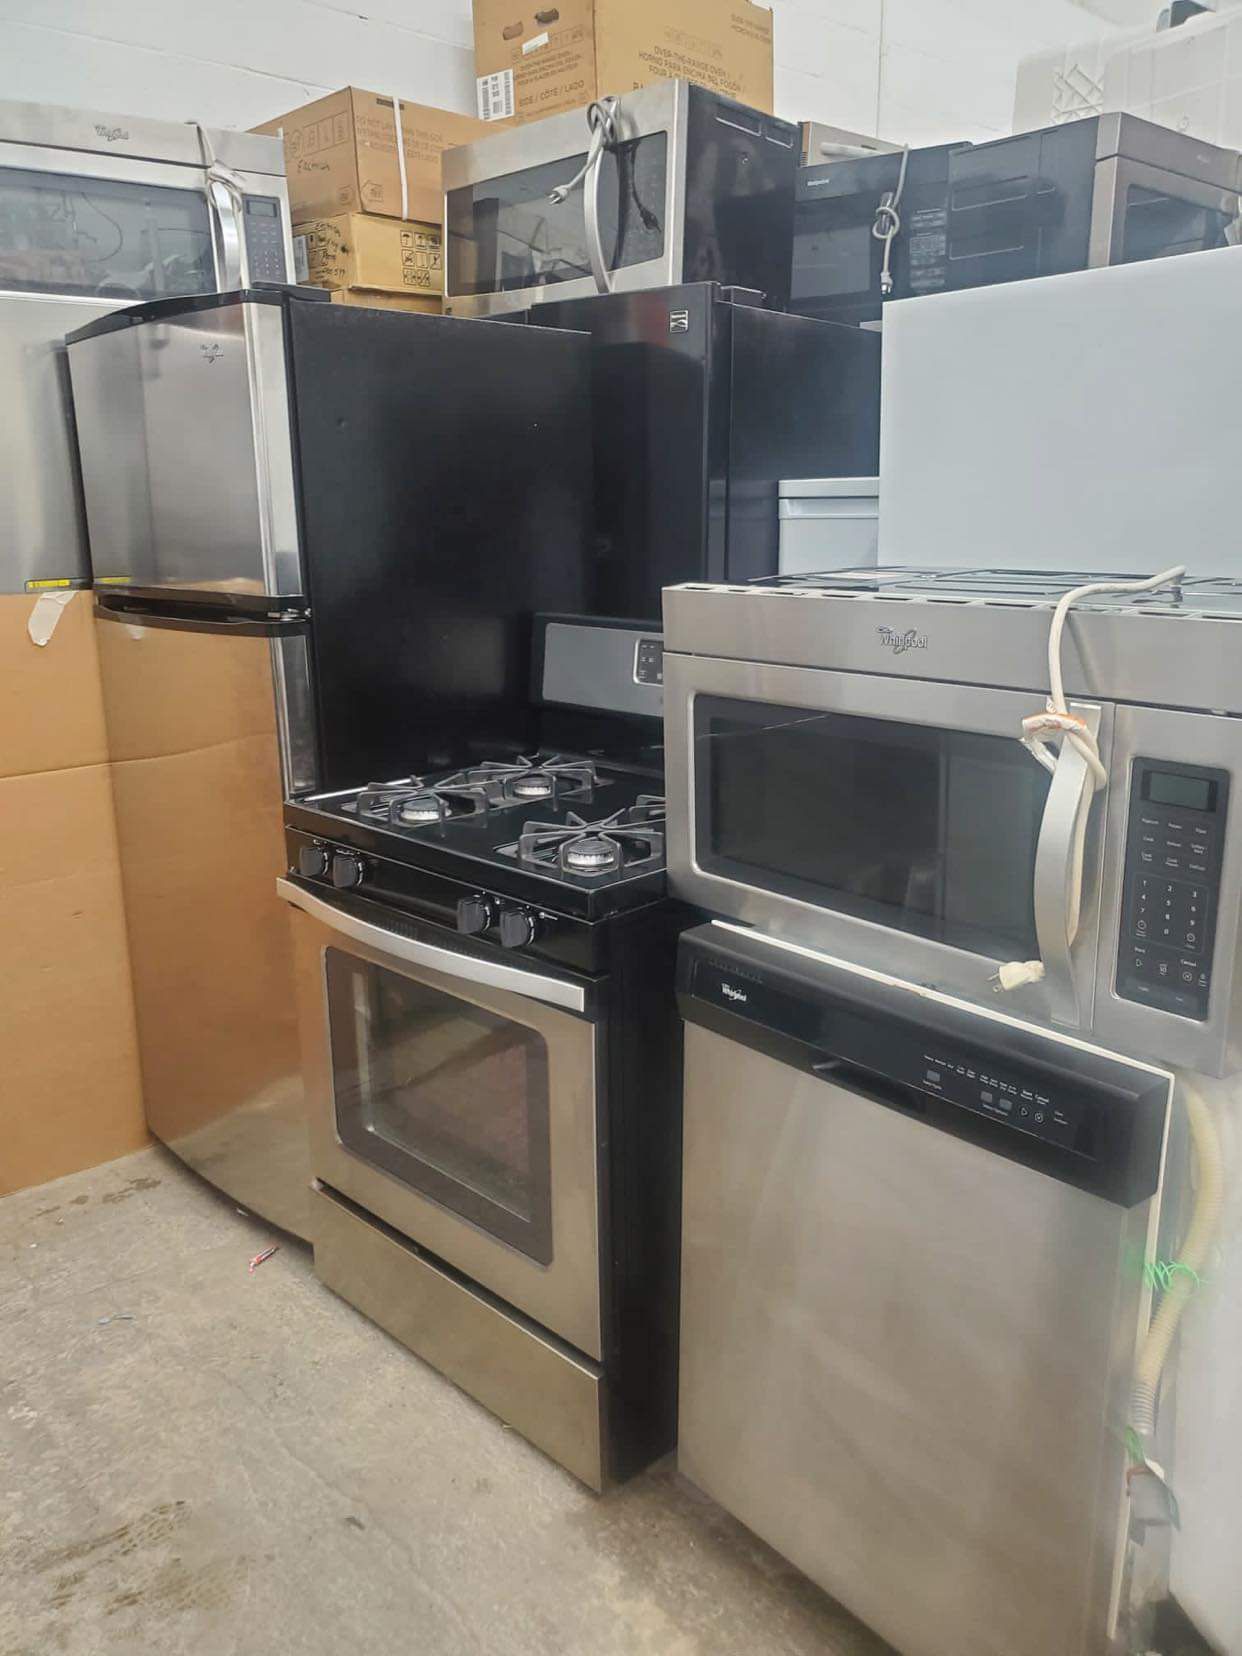 Set Whirlpool Stove, Refrigerator, Dishwasher And Microwave 